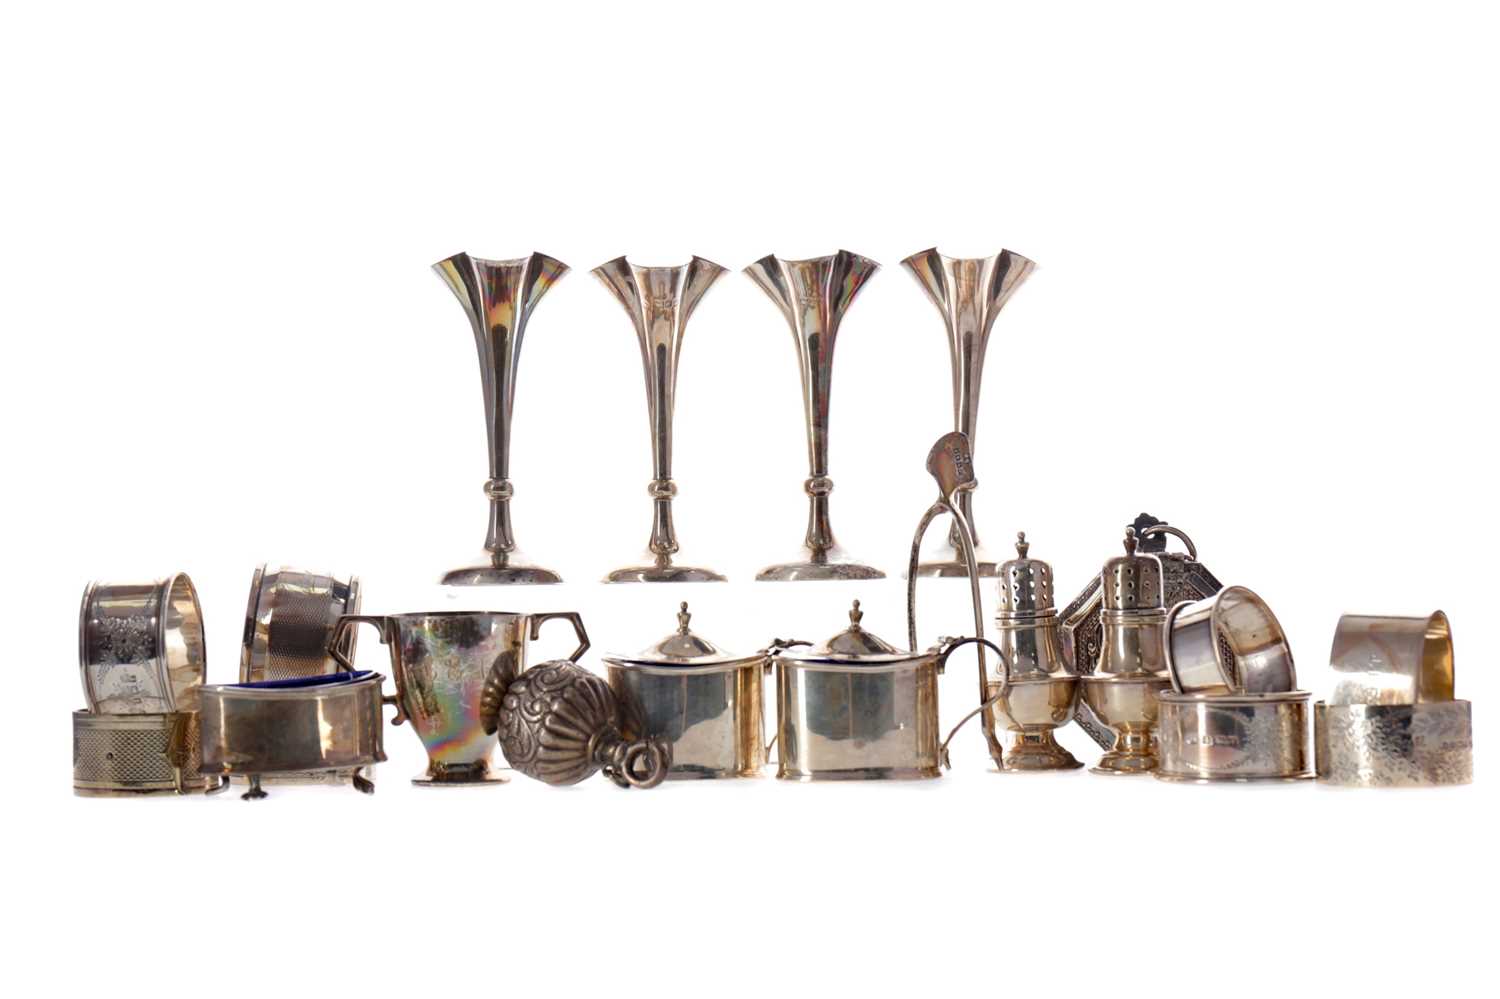 Lot 475 - A SET OF FOUR EDWARDIAN SILVER SOLIFLEUR VASES AND OTHER SILVER